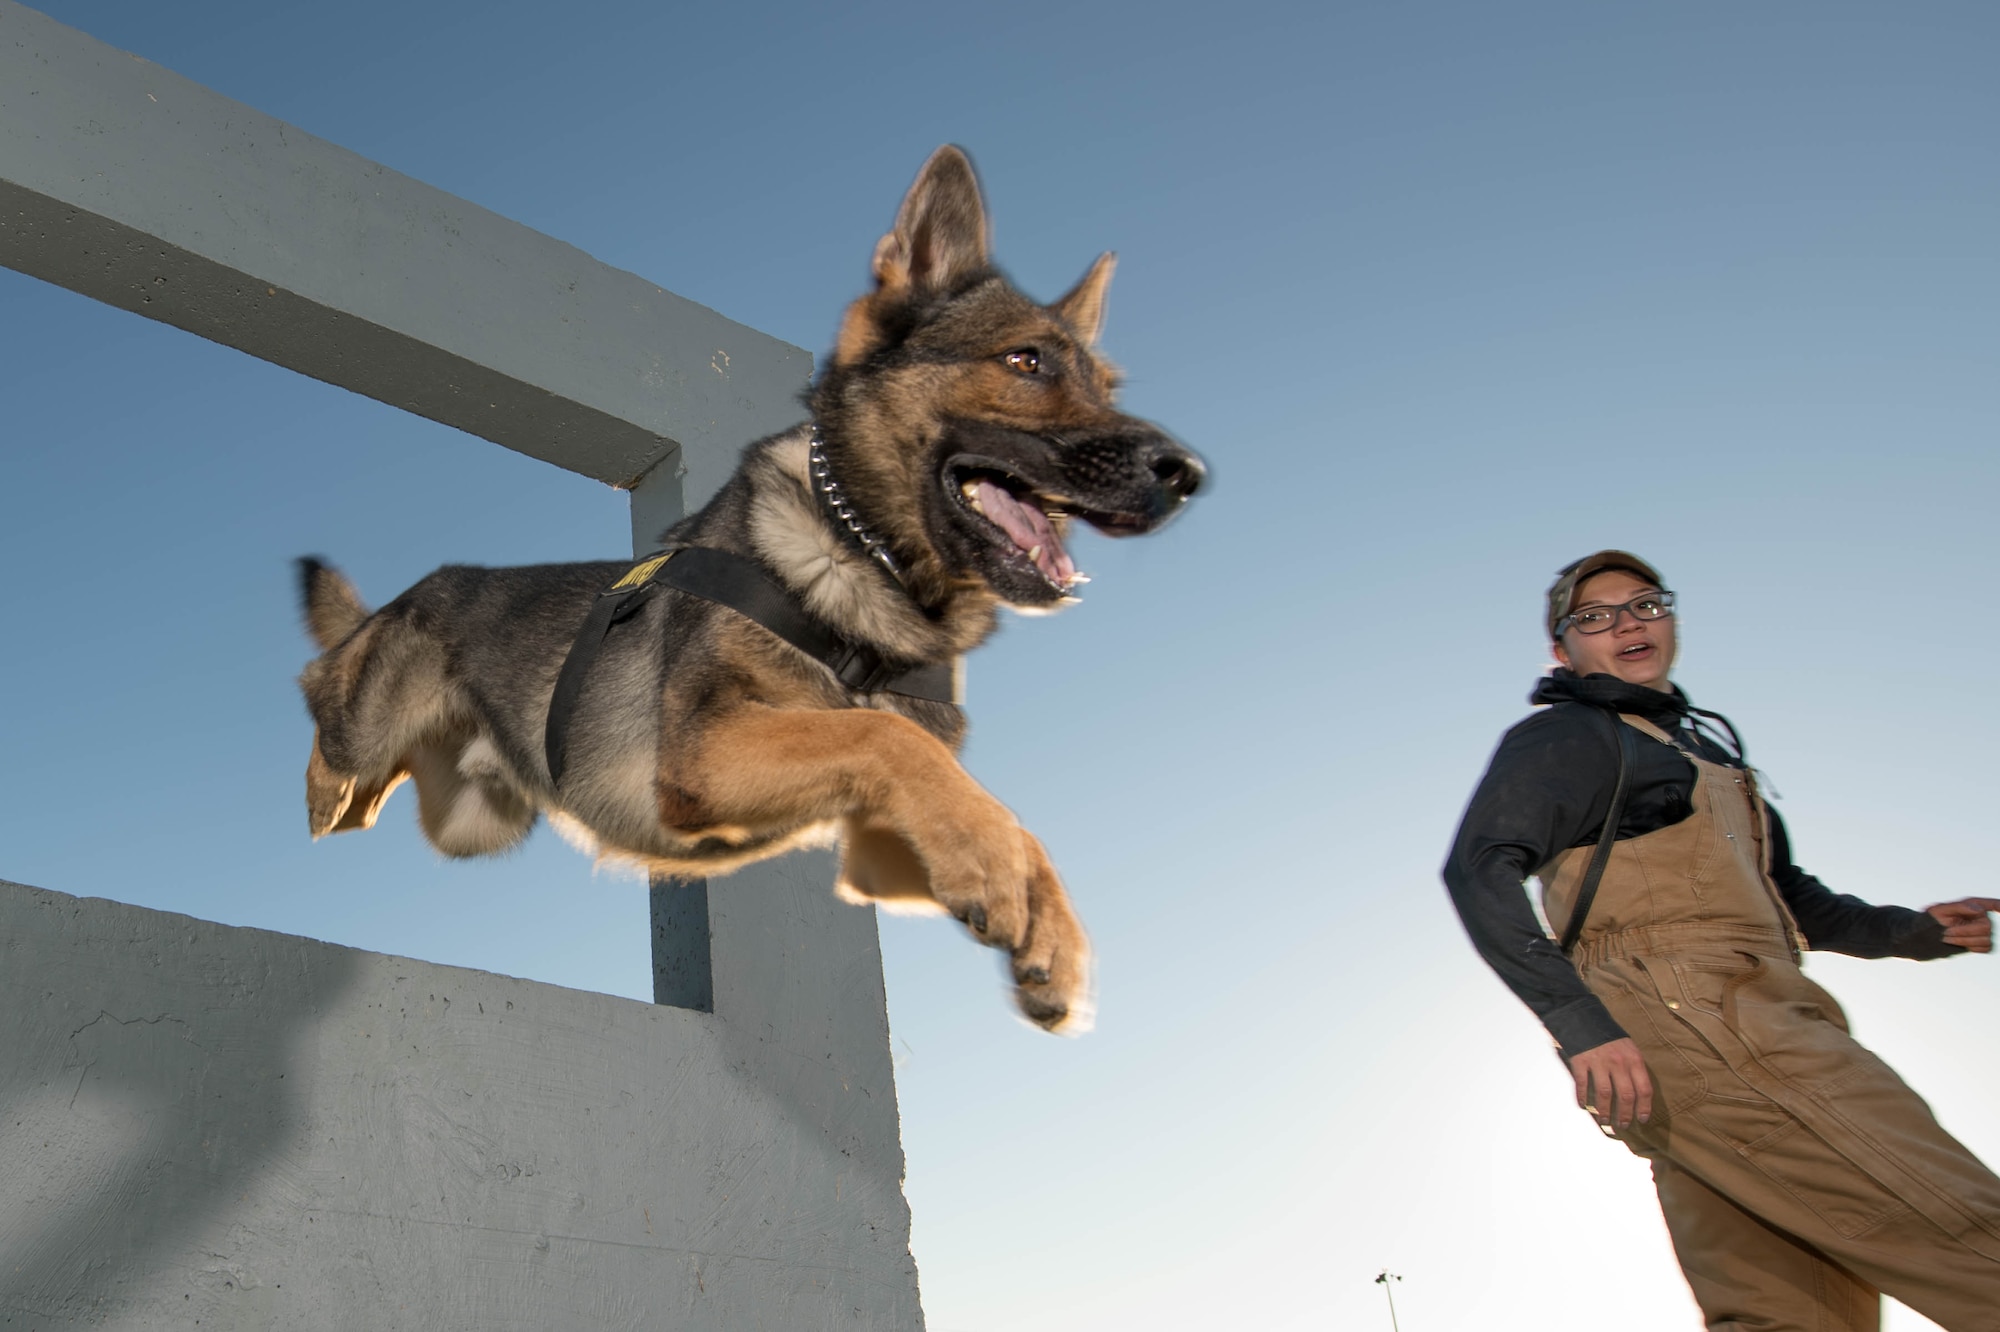 Senior Airman Theresa Braak, 436th Security Forces Squadron military working dog handler, and Military Working Dog Sam negotiate a window obstacle Oct. 8, 2020, at Dover Air Force Base, Delaware. The window is one of nine obstacles in the obedience yard. (U.S. Air Force photo by Mauricio Campino)